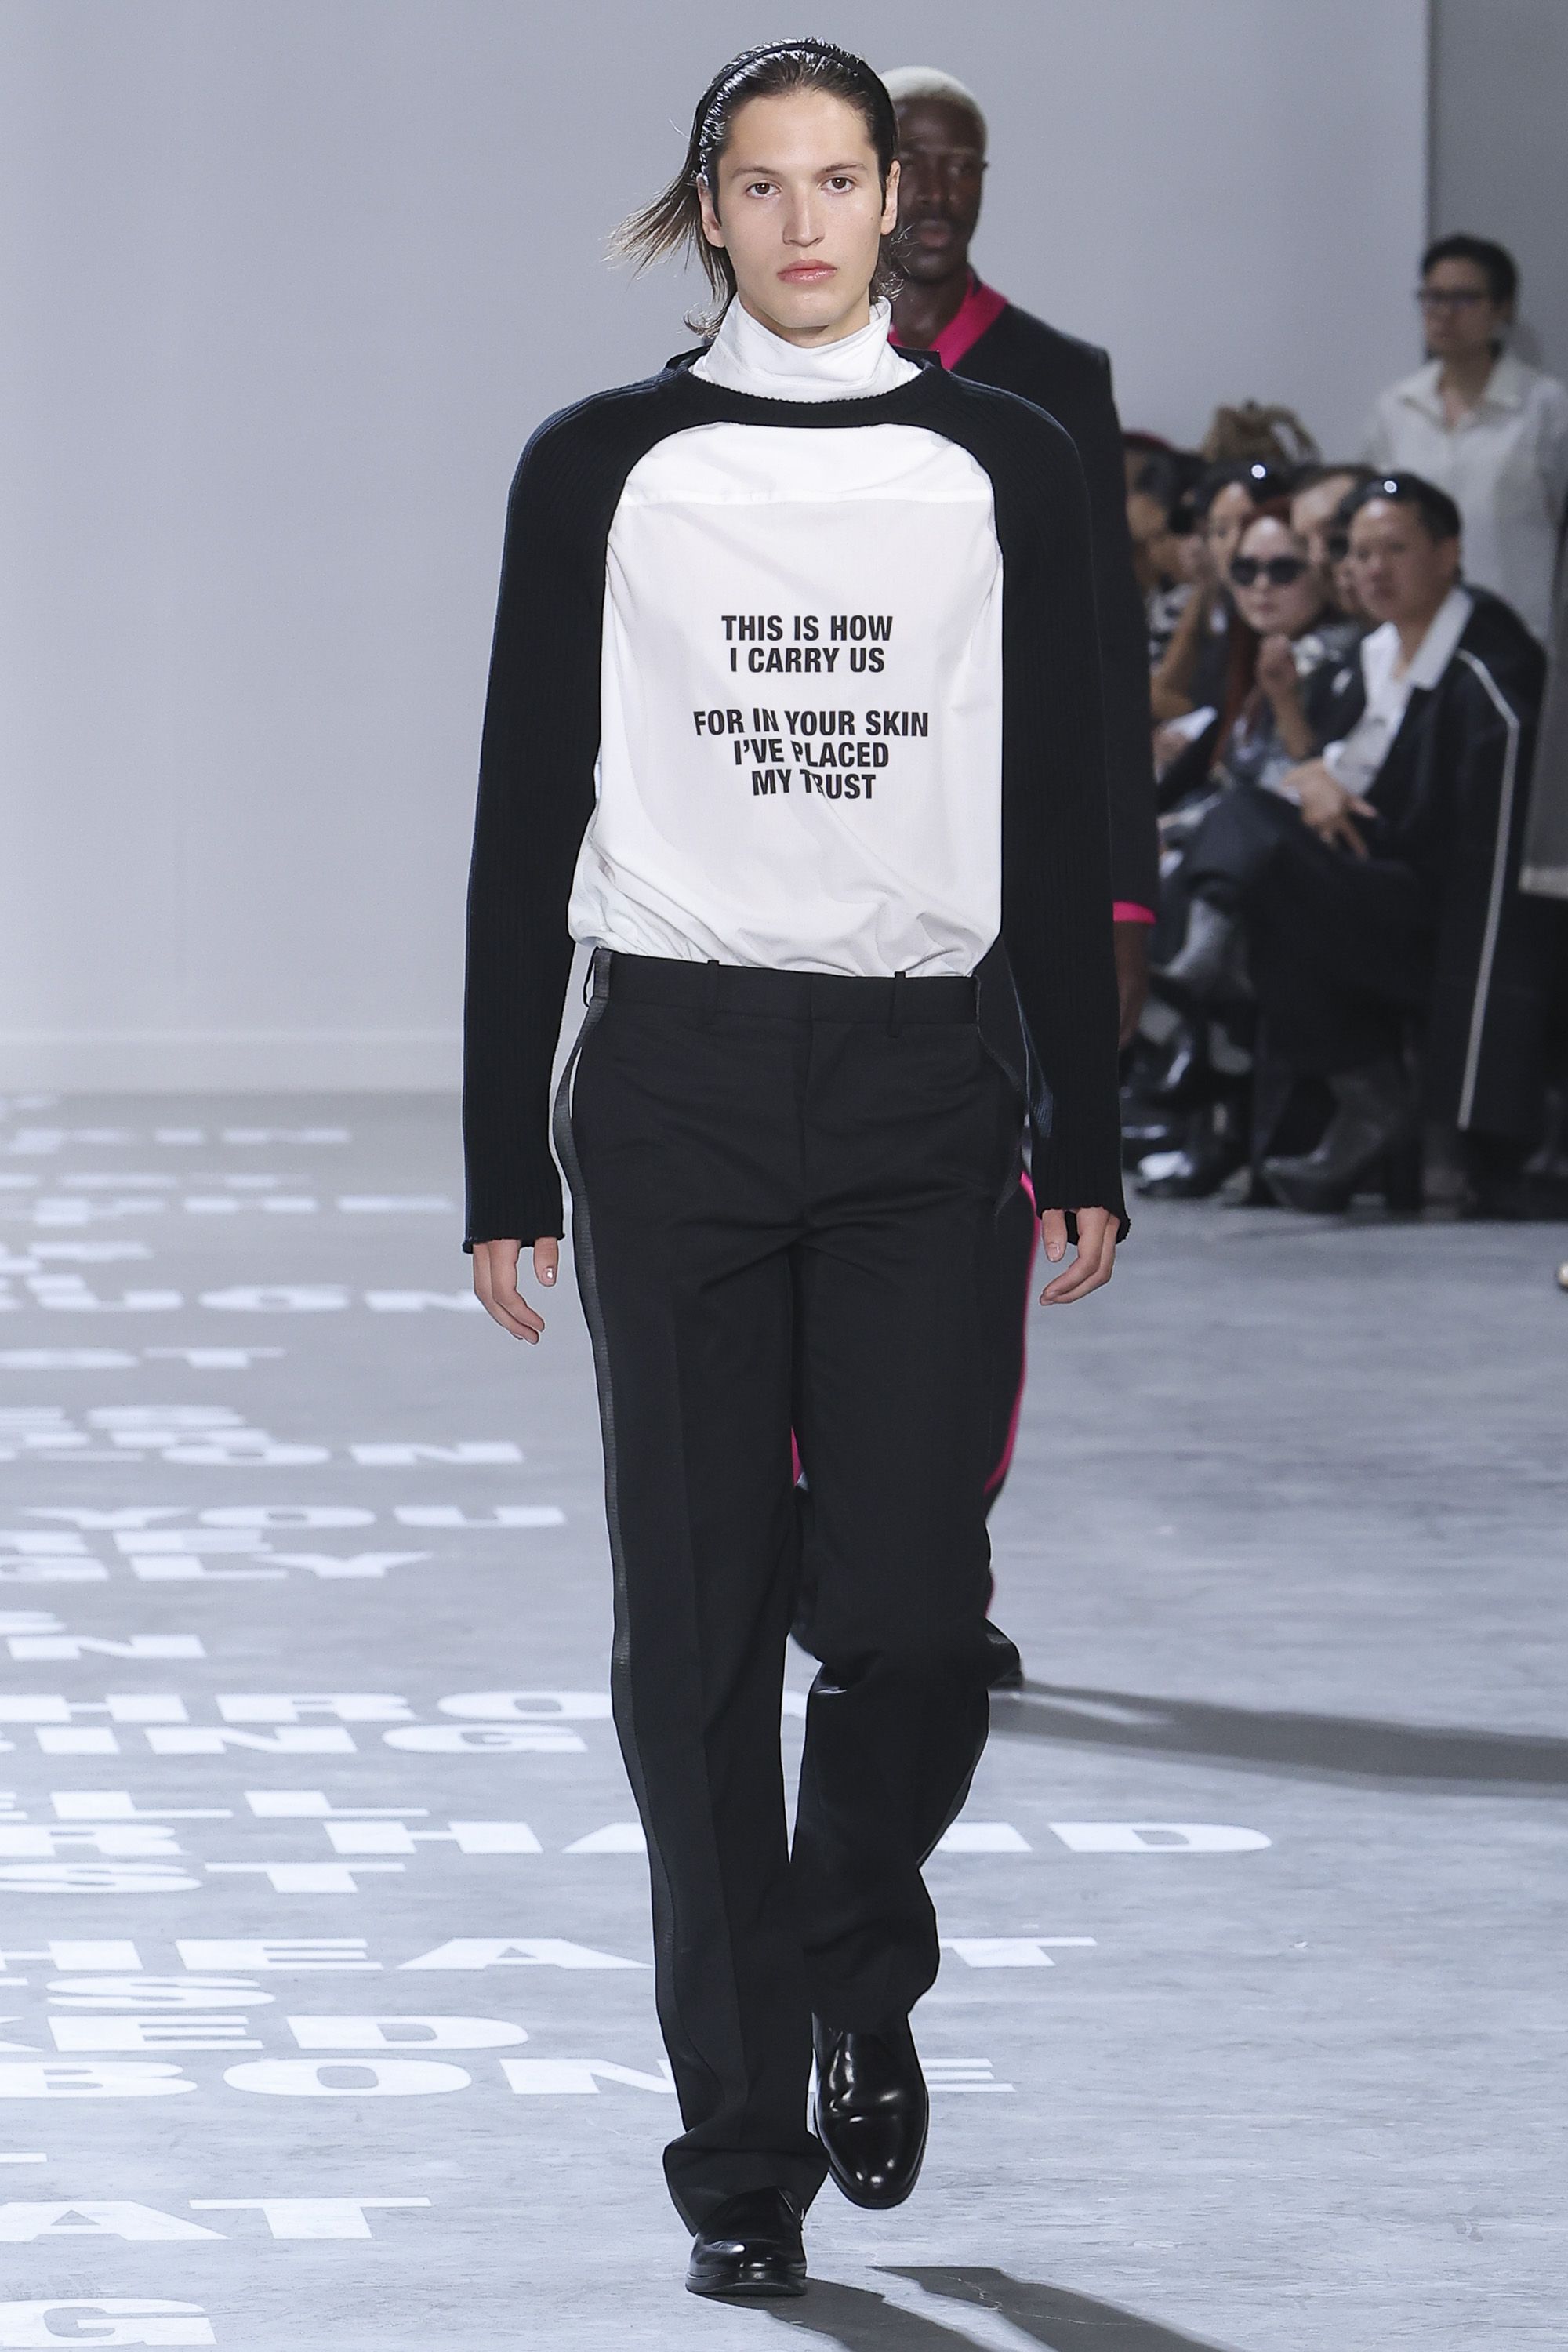 NYFW exclusive: Peter Do's debut at Helmut Lang